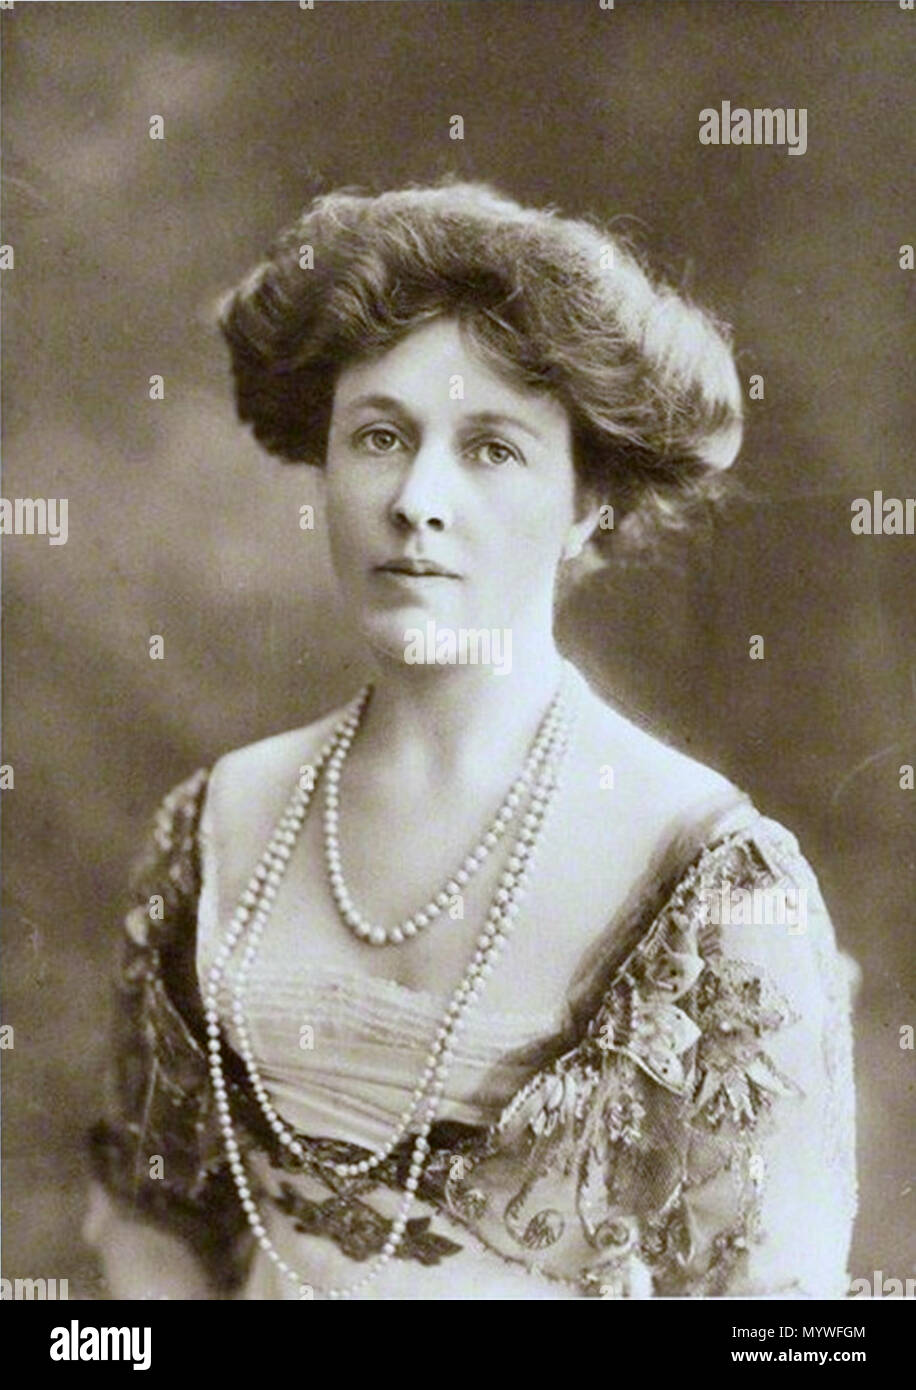 . English: Lady Monica Lilly Bullough was born in Christchurch, New Zealand on 7 April 1869. Her mother died the following day. She is the eldest daughter of French aristocrat Gerard Gastavus Ducarel (1838-1916), fourth Marquis de la Pasture and Léontine Standish (1843-1869). Monique marries first Charles Edward Nicholas Charrington on 19 March 1889. From this marriage was born the following year, Dorothea Elizabeth Charrington. This marriage is a failure and the divorce is pronounced on 25 May 1903. A month later, Monique Ducarel de la Pasture married Sir George Bullough (1870-1939), 1st Baro Stock Photo